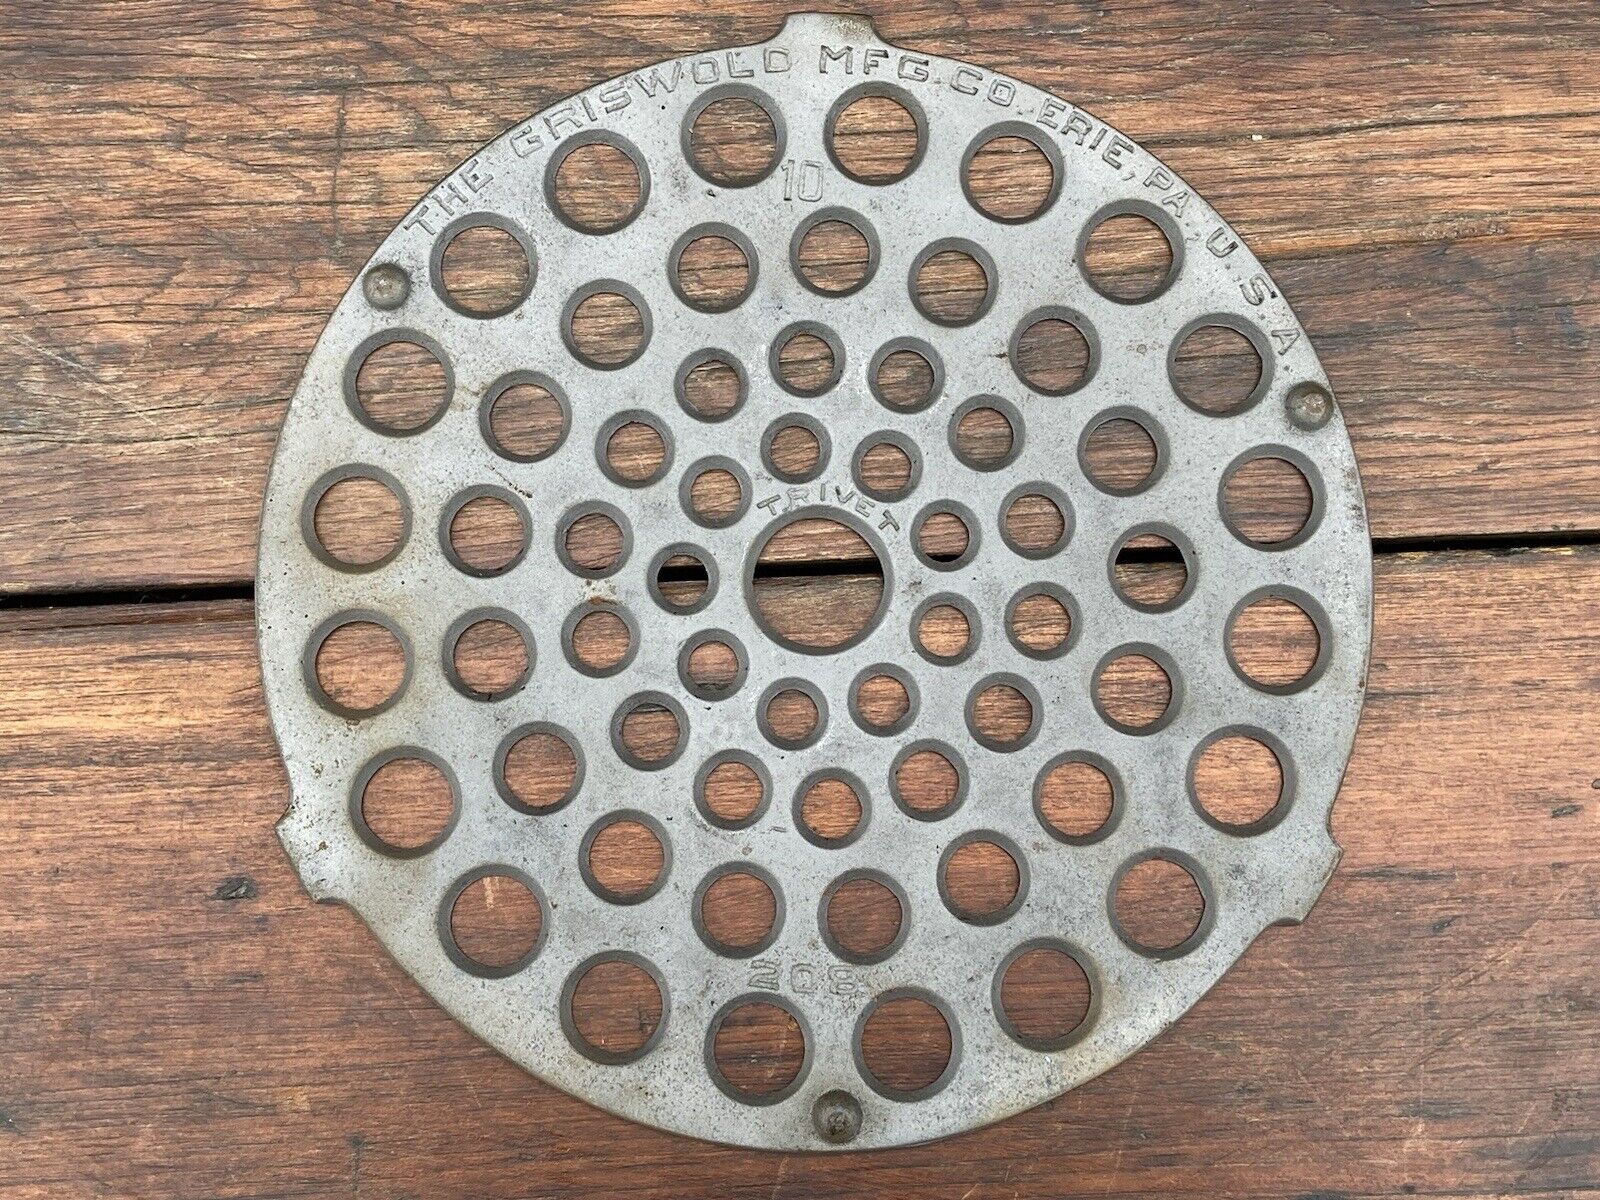 Griswold Cast Iron #10 Dutch Oven Trivet in Nickel Finish